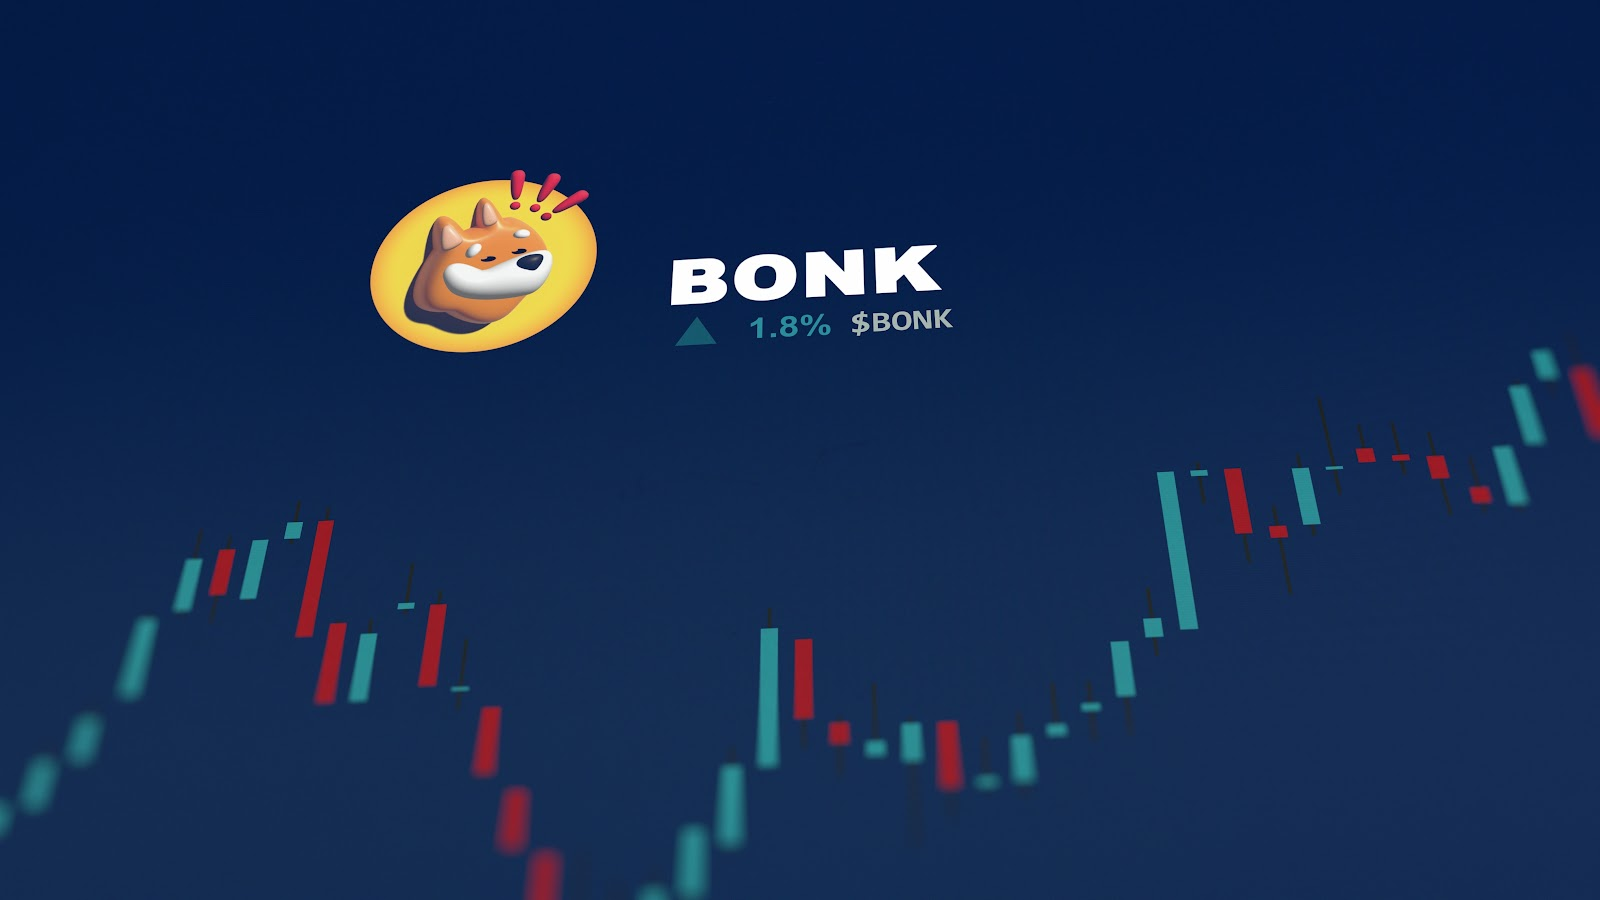 NuggetRush Presale Is A Difference Maker For Investors Awaiting Price Bounce On BONK And ORDI